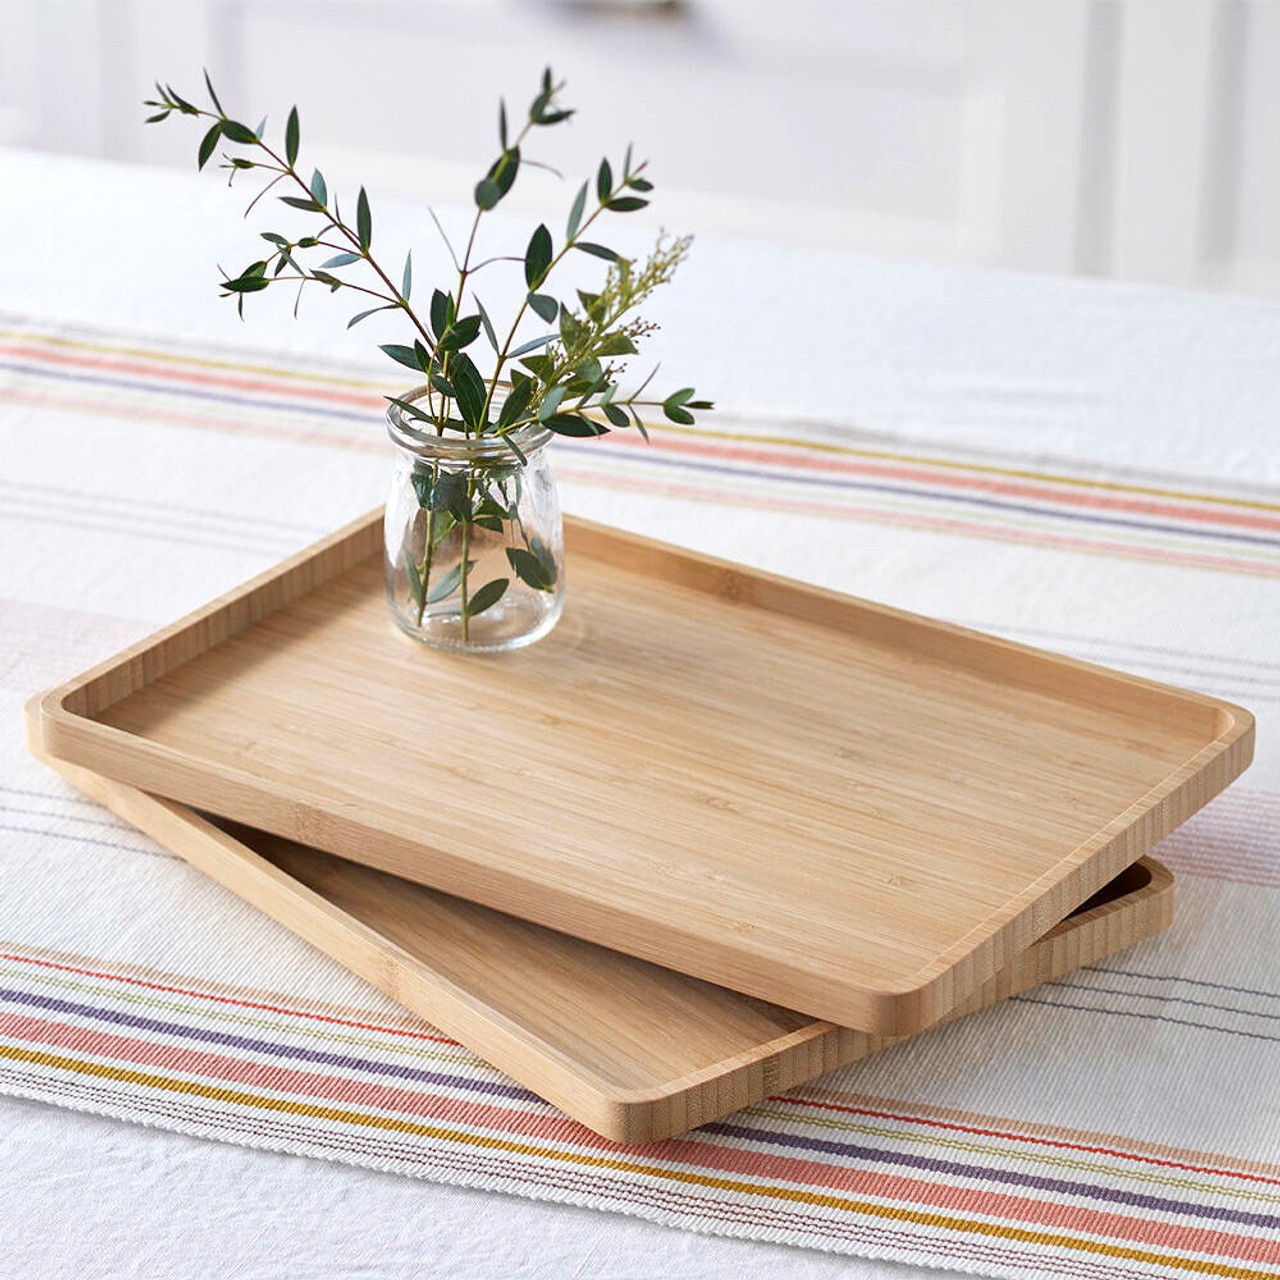 https://cdn11.bigcommerce.com/s-j602wc6a/images/stencil/1280x1280/products/7562/29999/013317-8x12-bamboo-trays__54877.1636419351.jpg?c=2